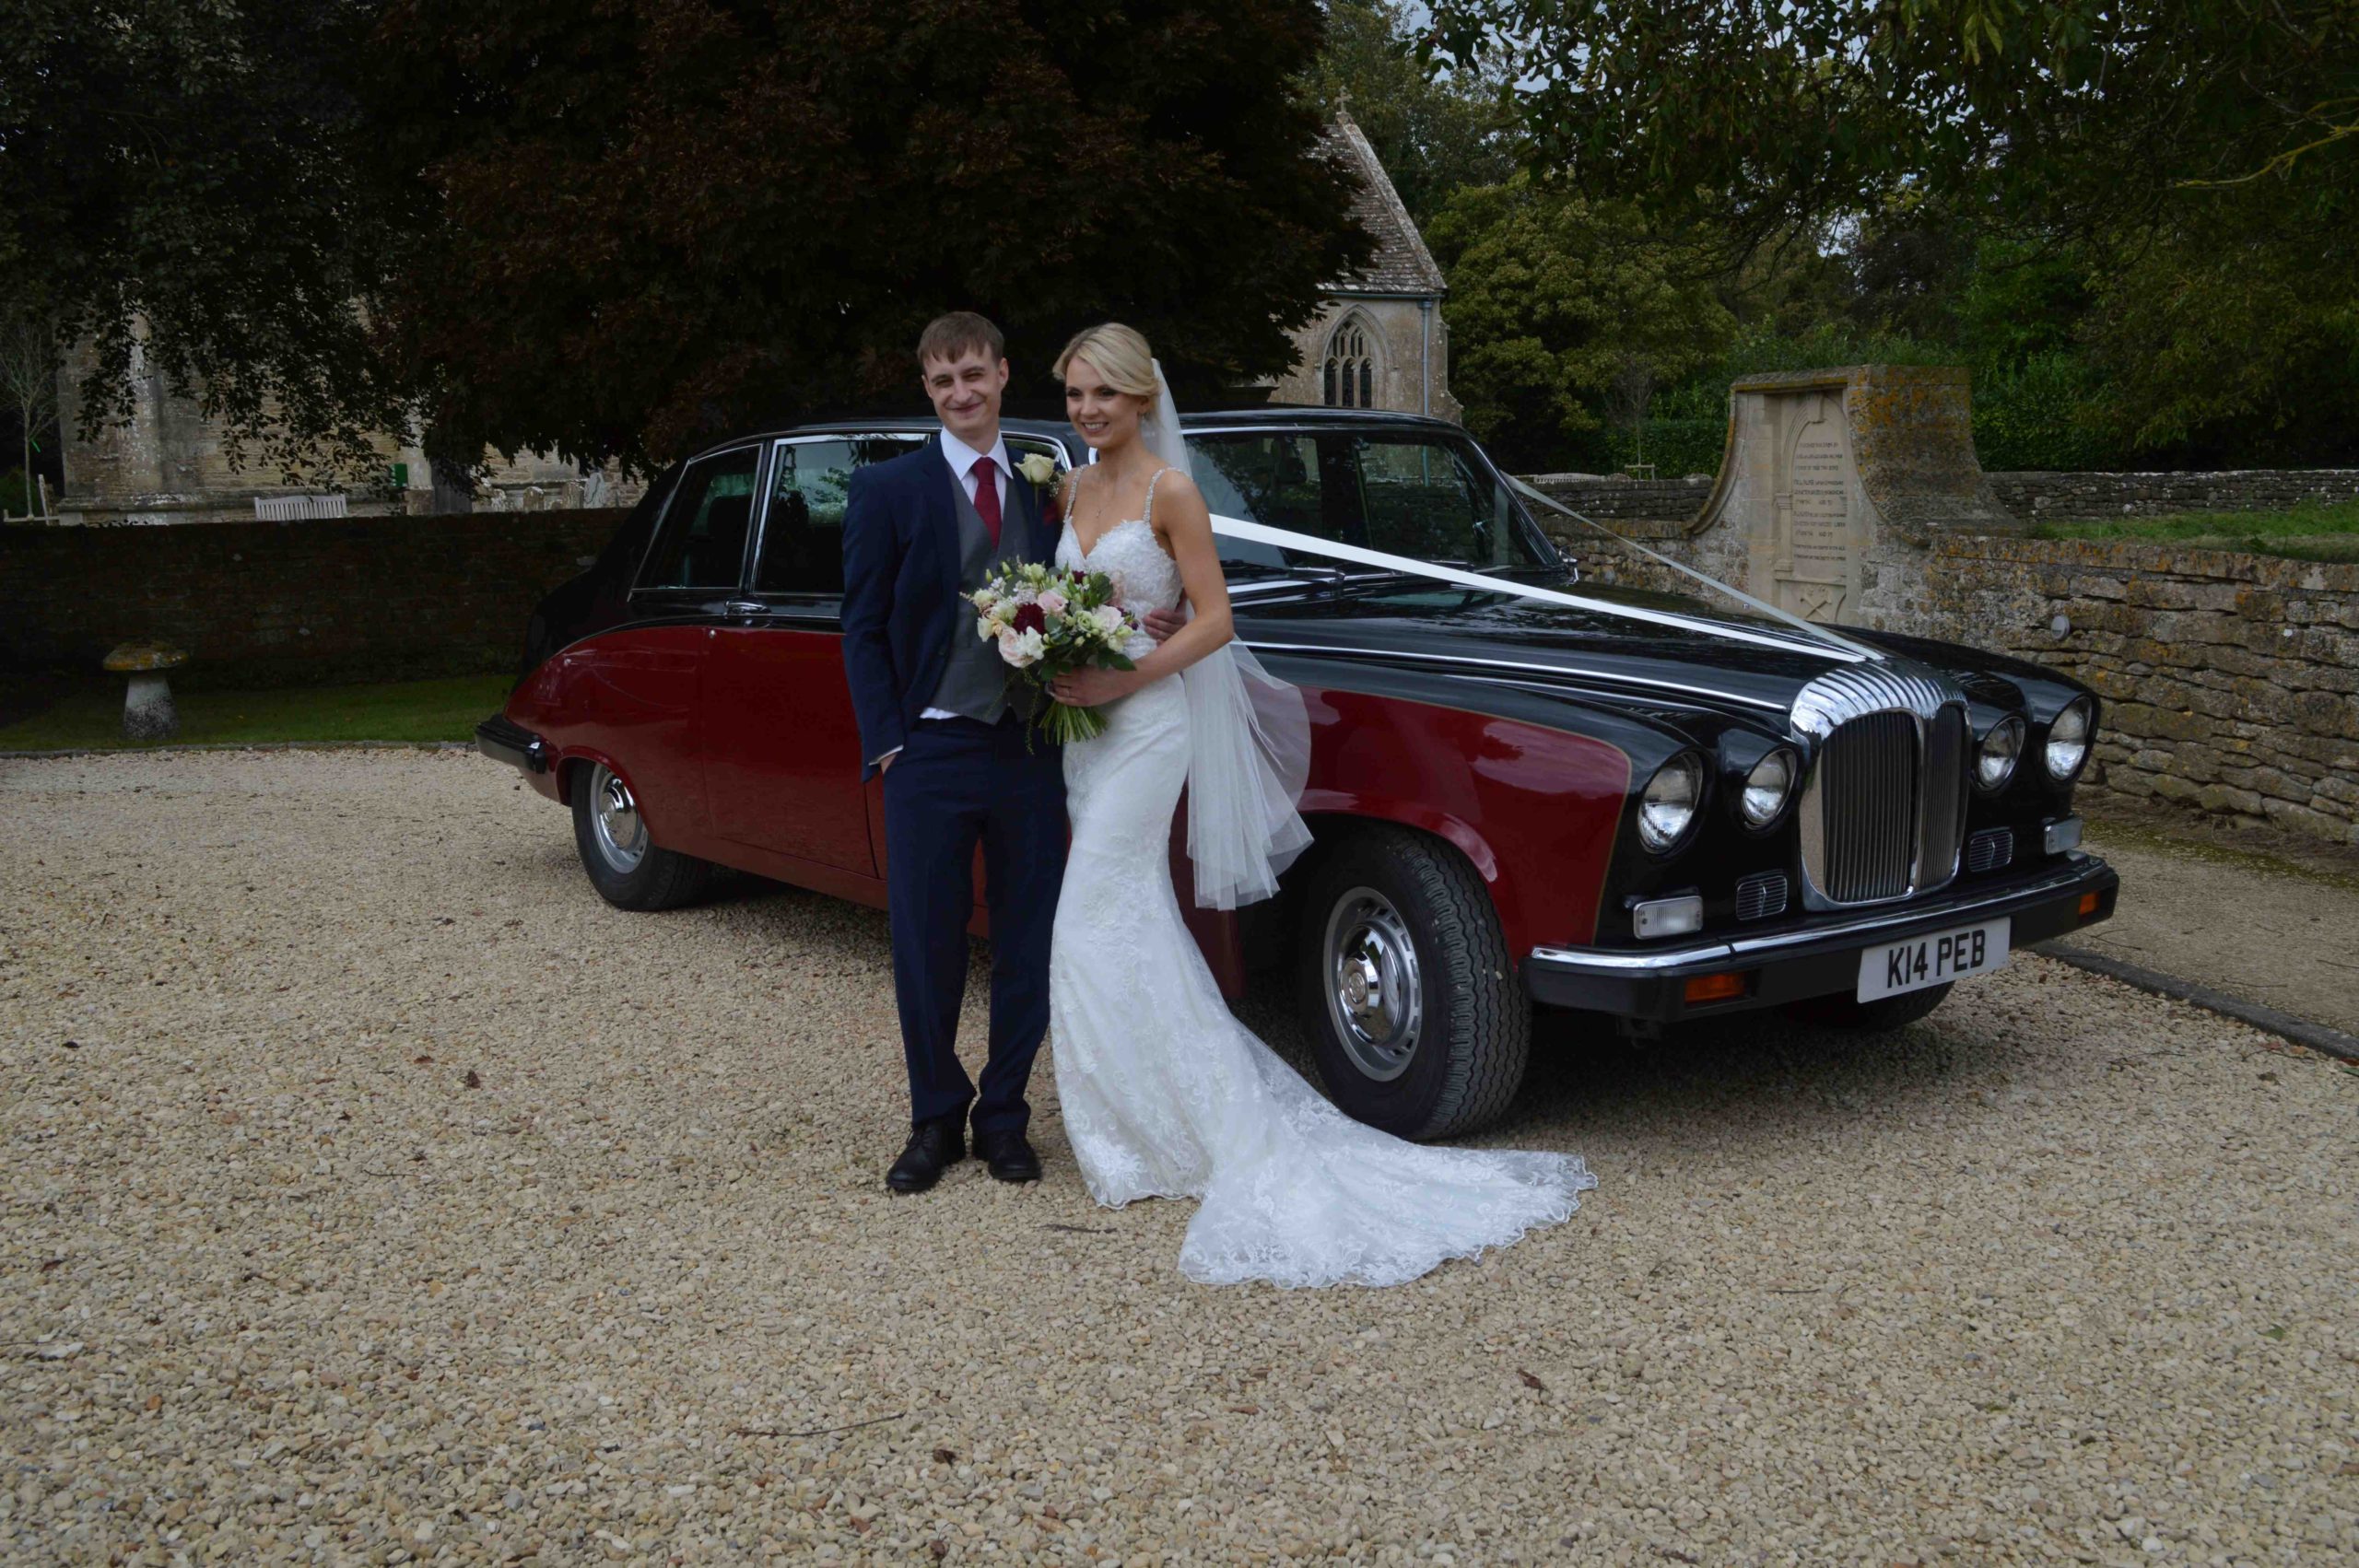 Great Somerford Church wedding for Katy and Henry 23 September 2023